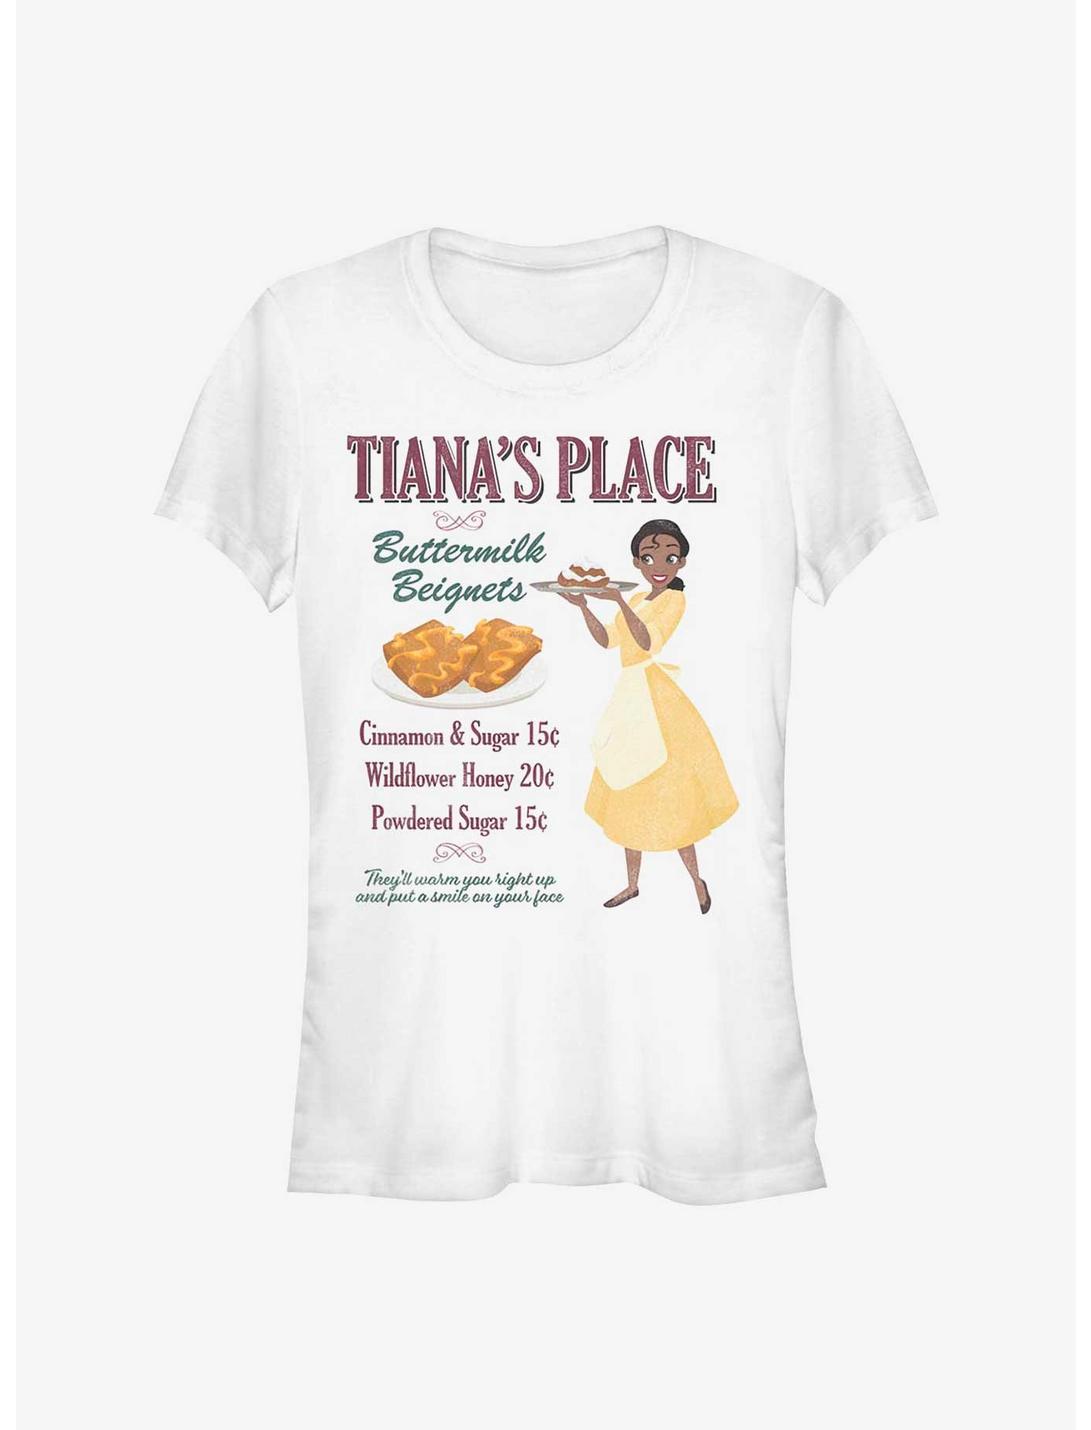 Disney The Princess and the Frog Tiana's Place Buttermilk Beignets Girls T-Shirt, WHITE, hi-res